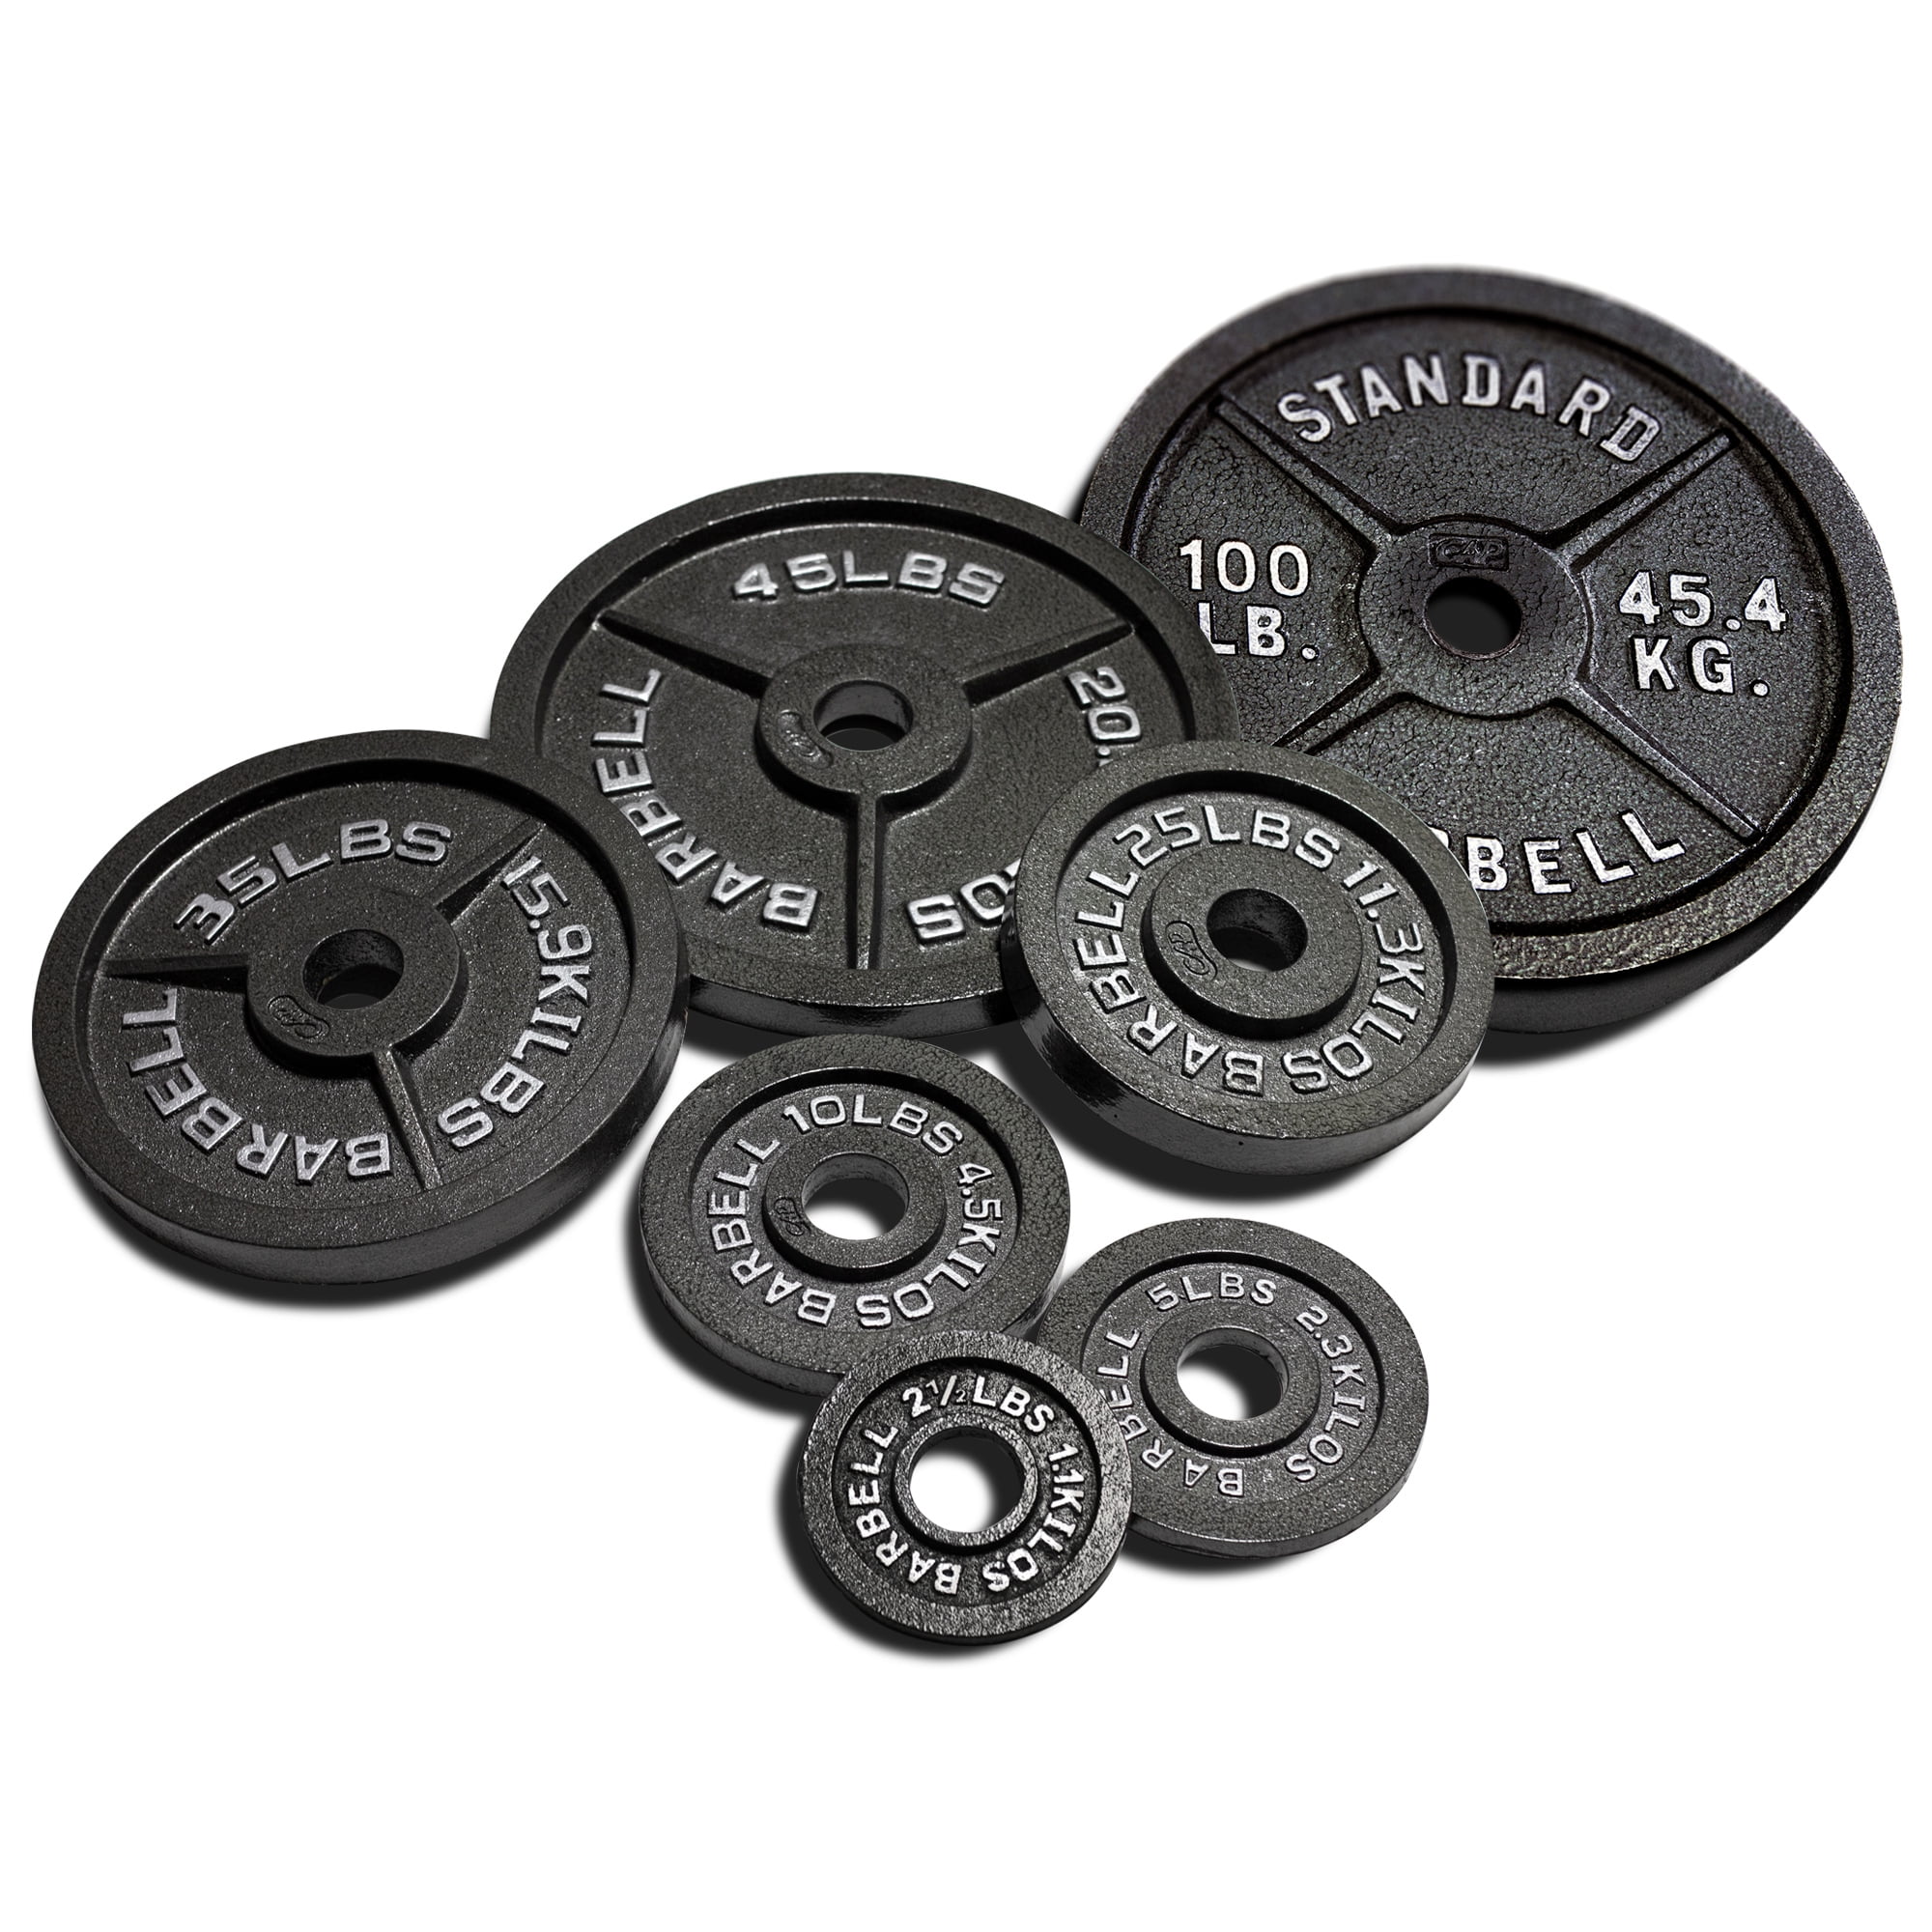 Single CAP Barbell Olympic 2-Inch 3-Grip Cast Iron Plate